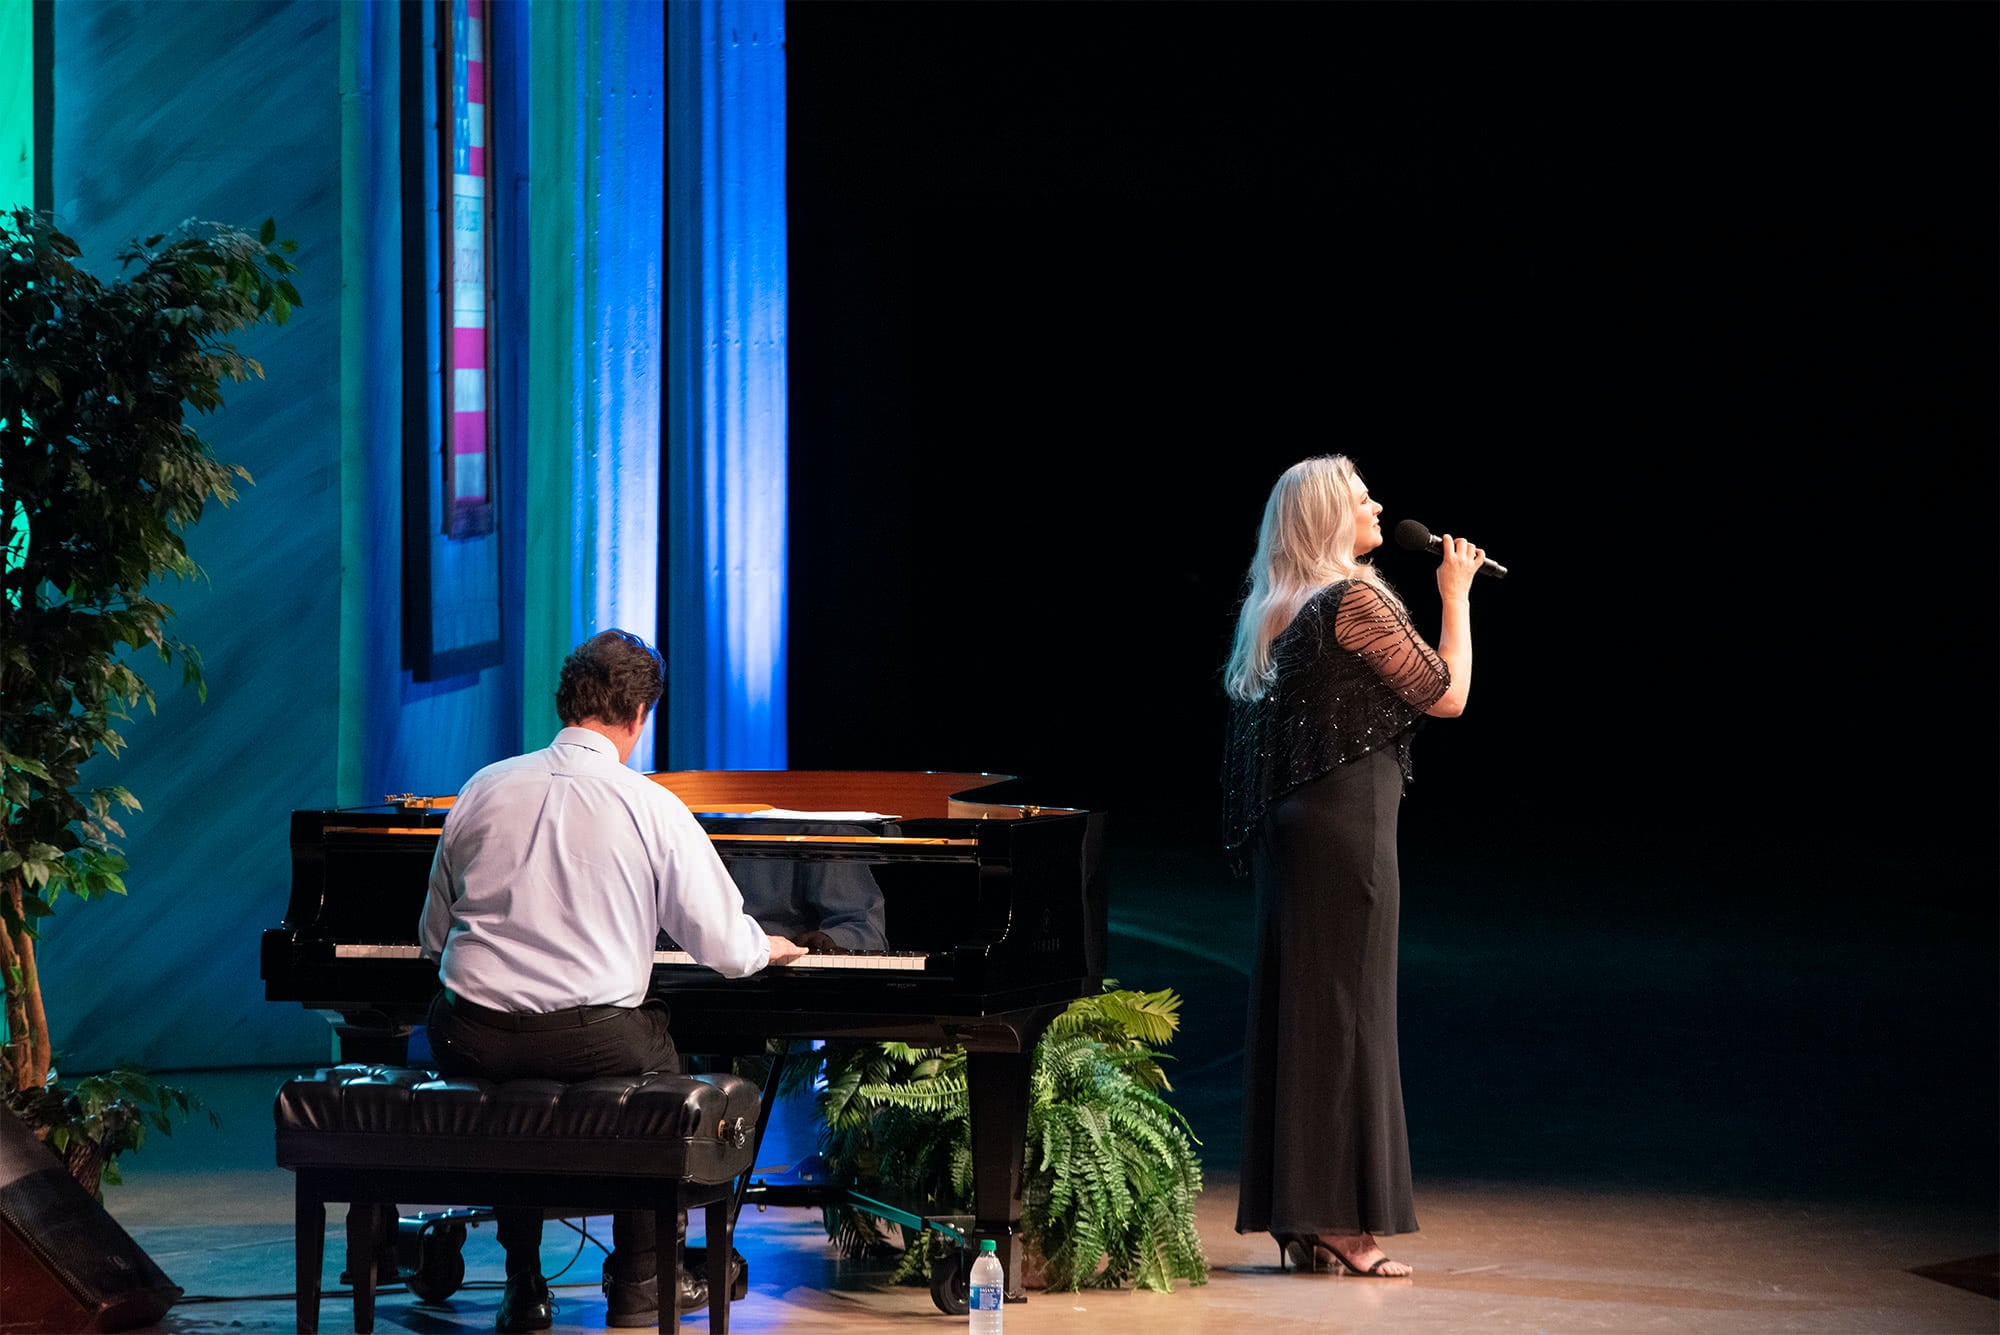 Female Liberty Voices singer wearing a black dress and singing next to a man playing the piano.